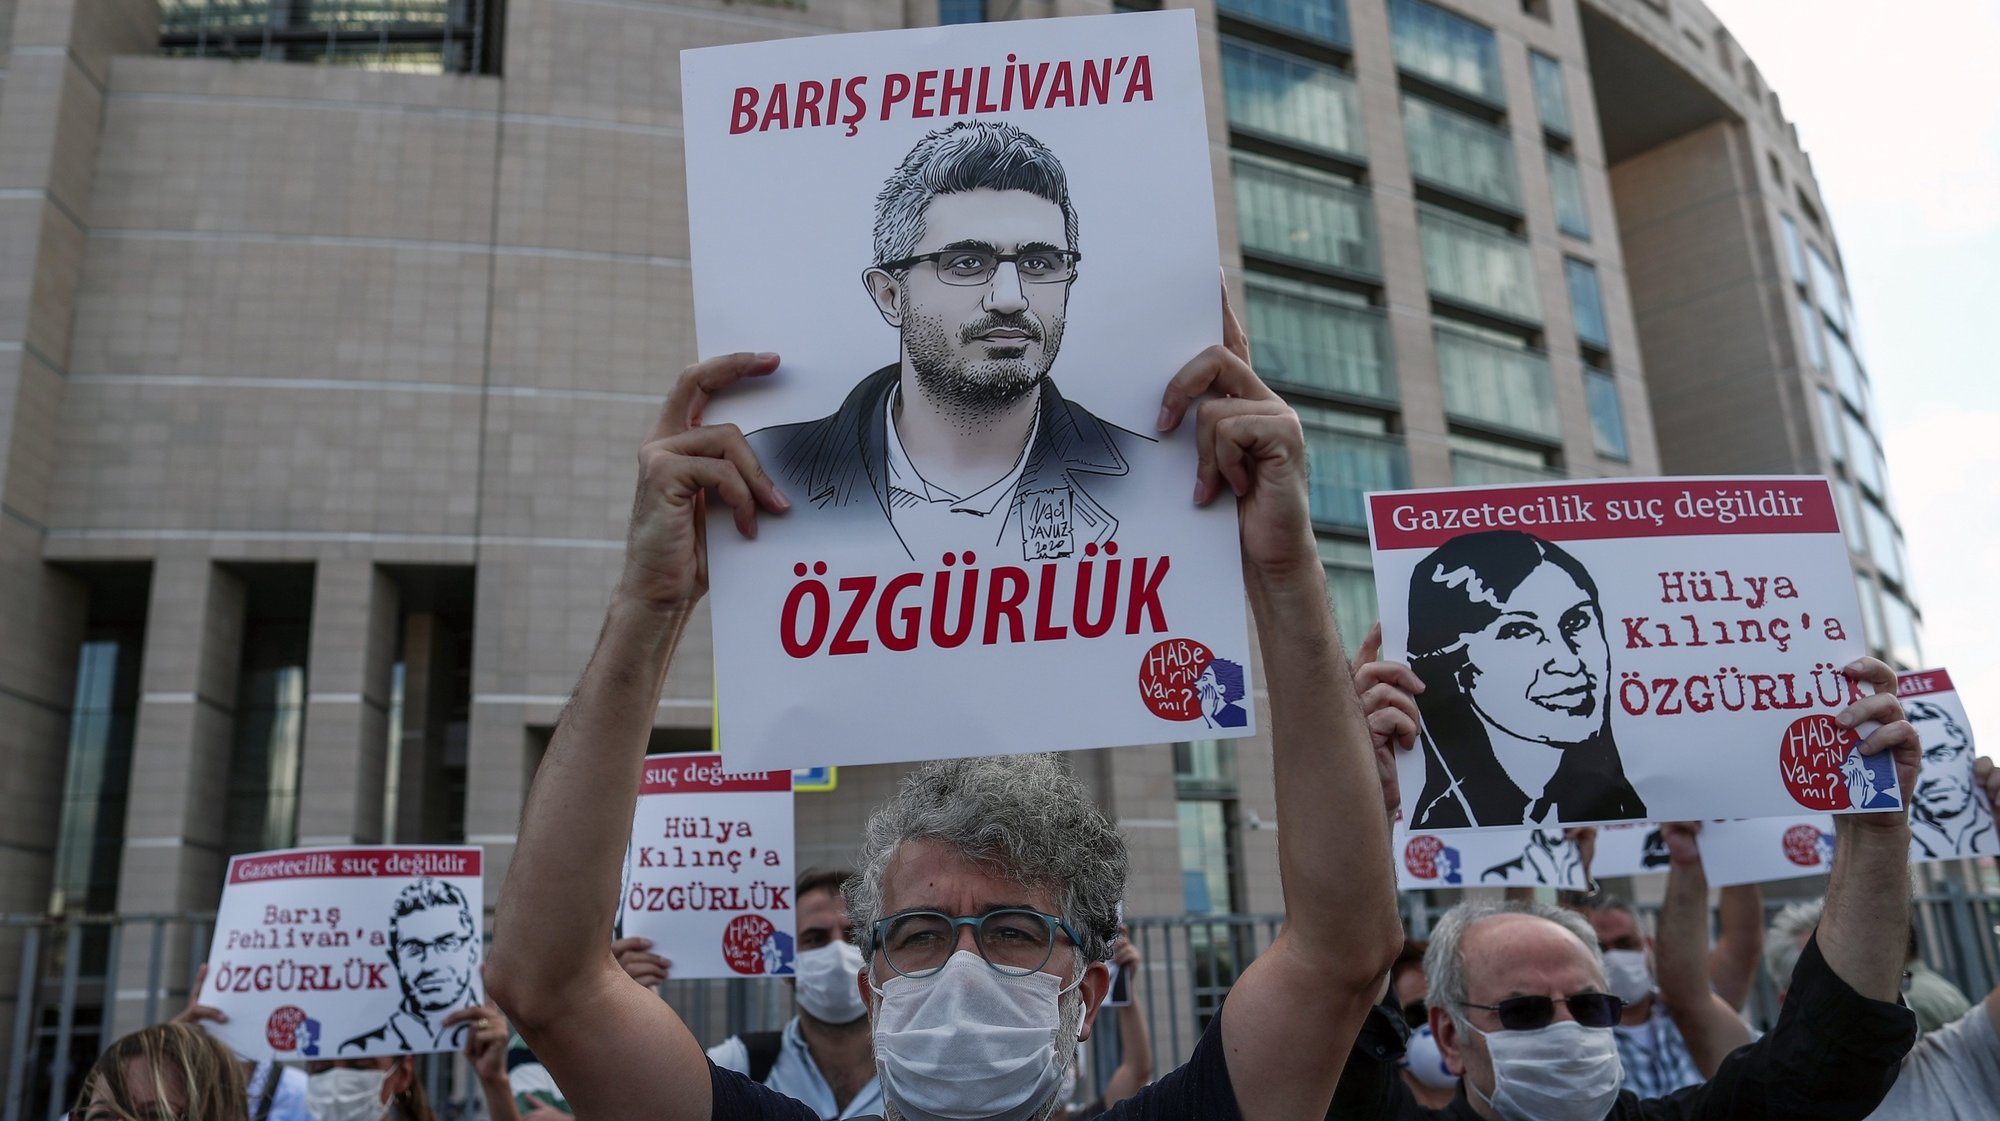 epa08656008 People hold posters depicting jailed journalists during a protest before a trial of jailed journalists in front of the Caglayan courthouse in Istanbul, Turkey,  09 September 2020. According to Reporters Without Borders, 30 journalists are in prison in Turkey.  EPA/SEDAT SUNA